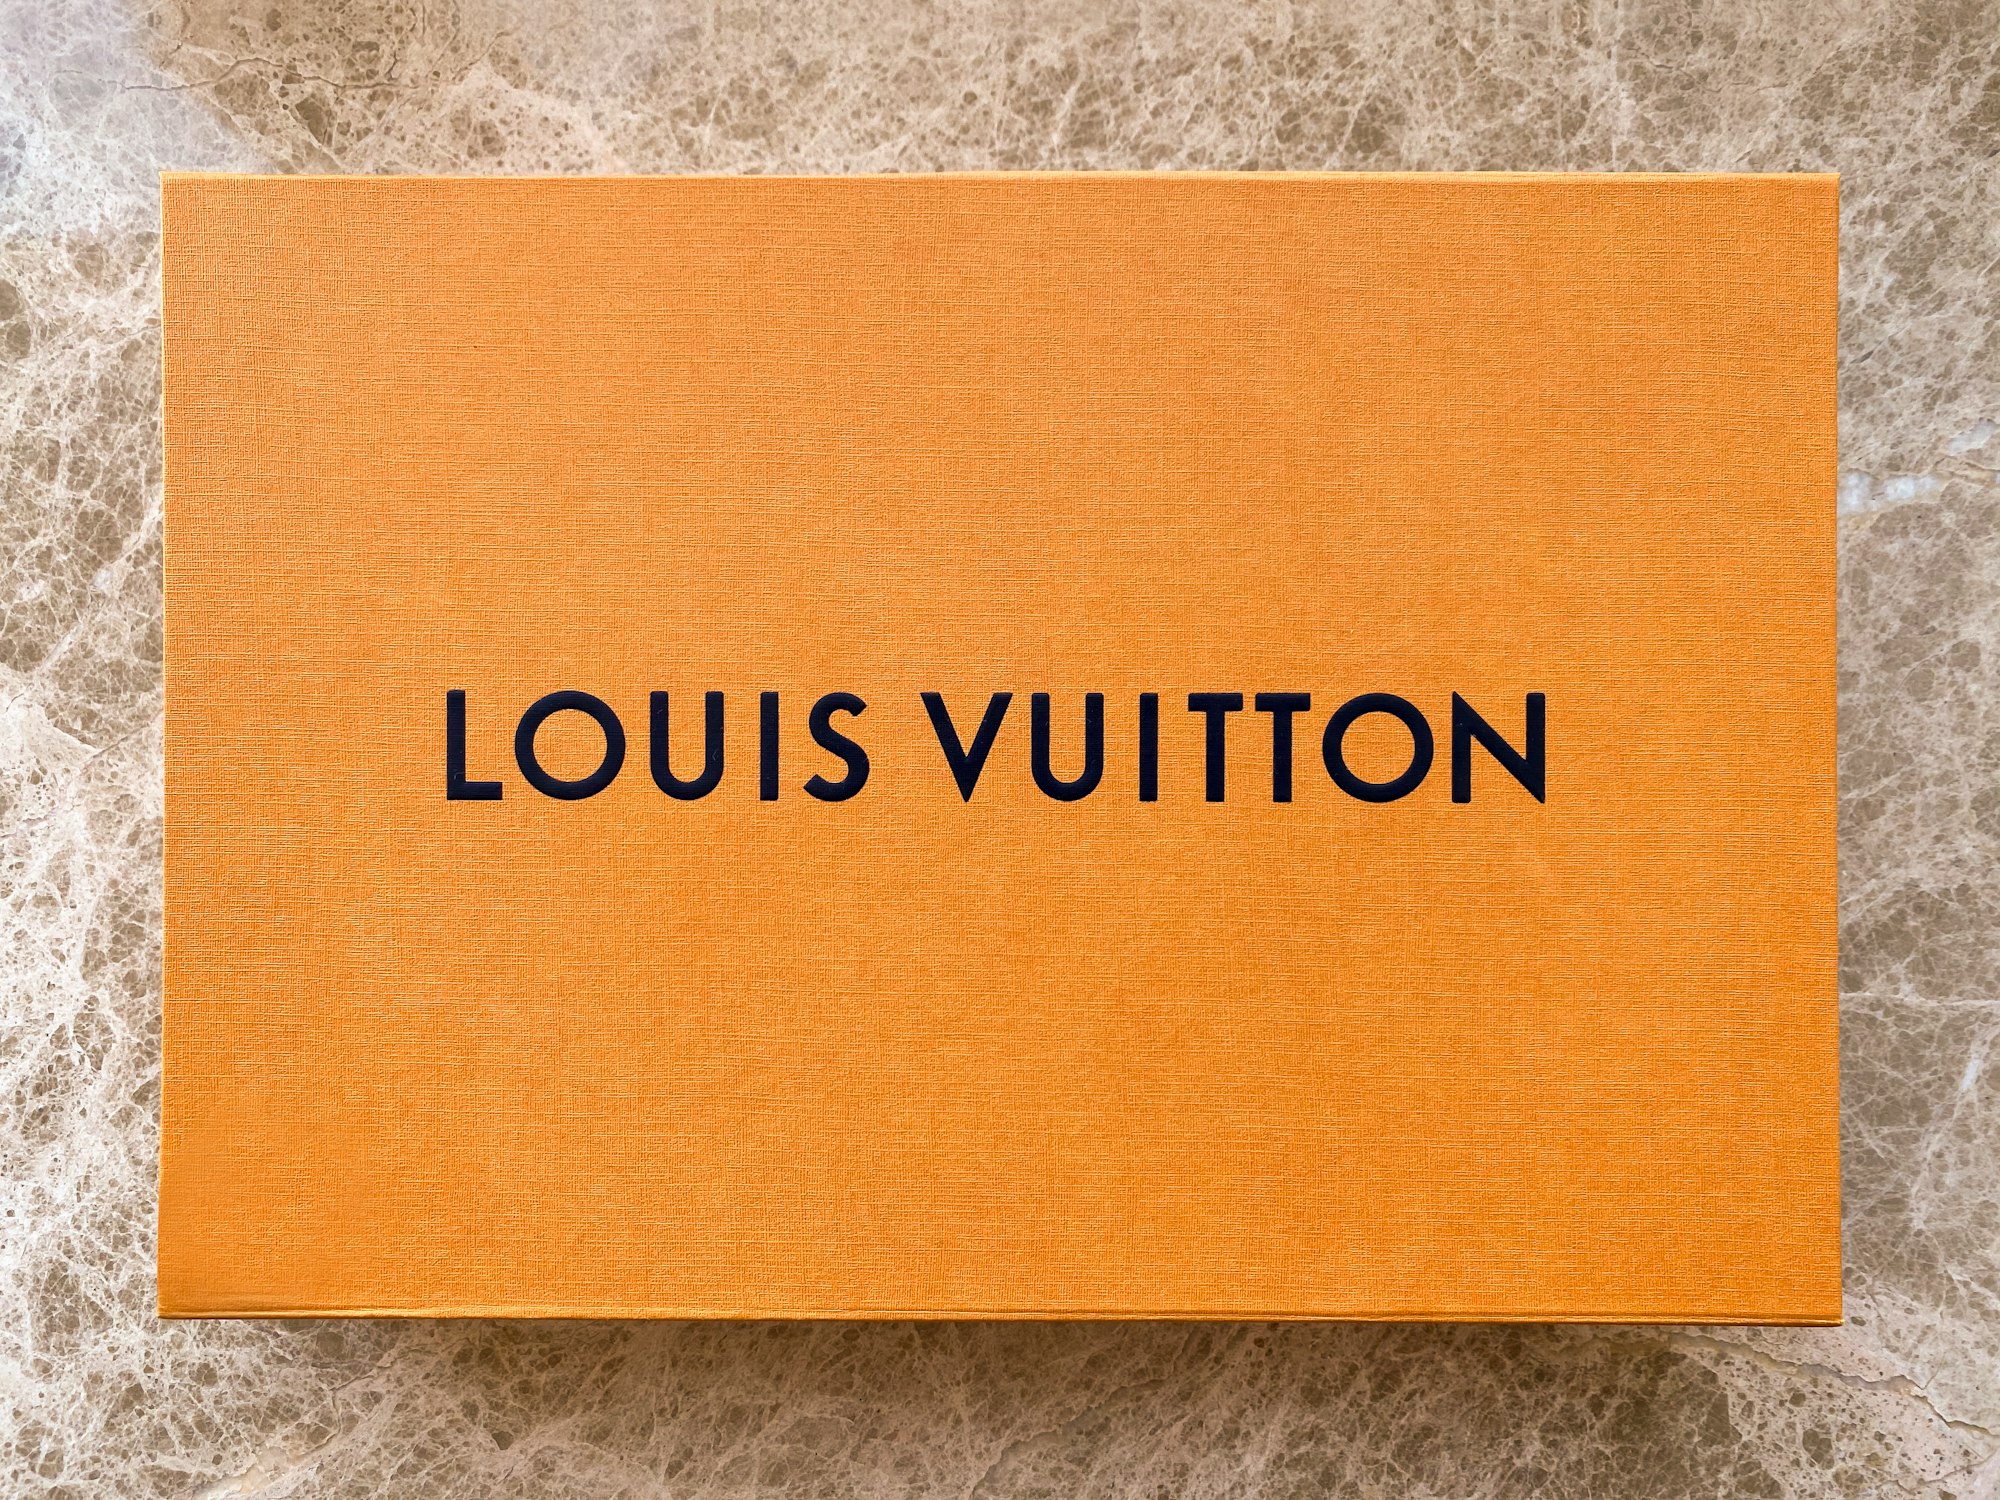 Louis Vuitton reveals an exceptional presentation of its know-how at the  New Bond Street House